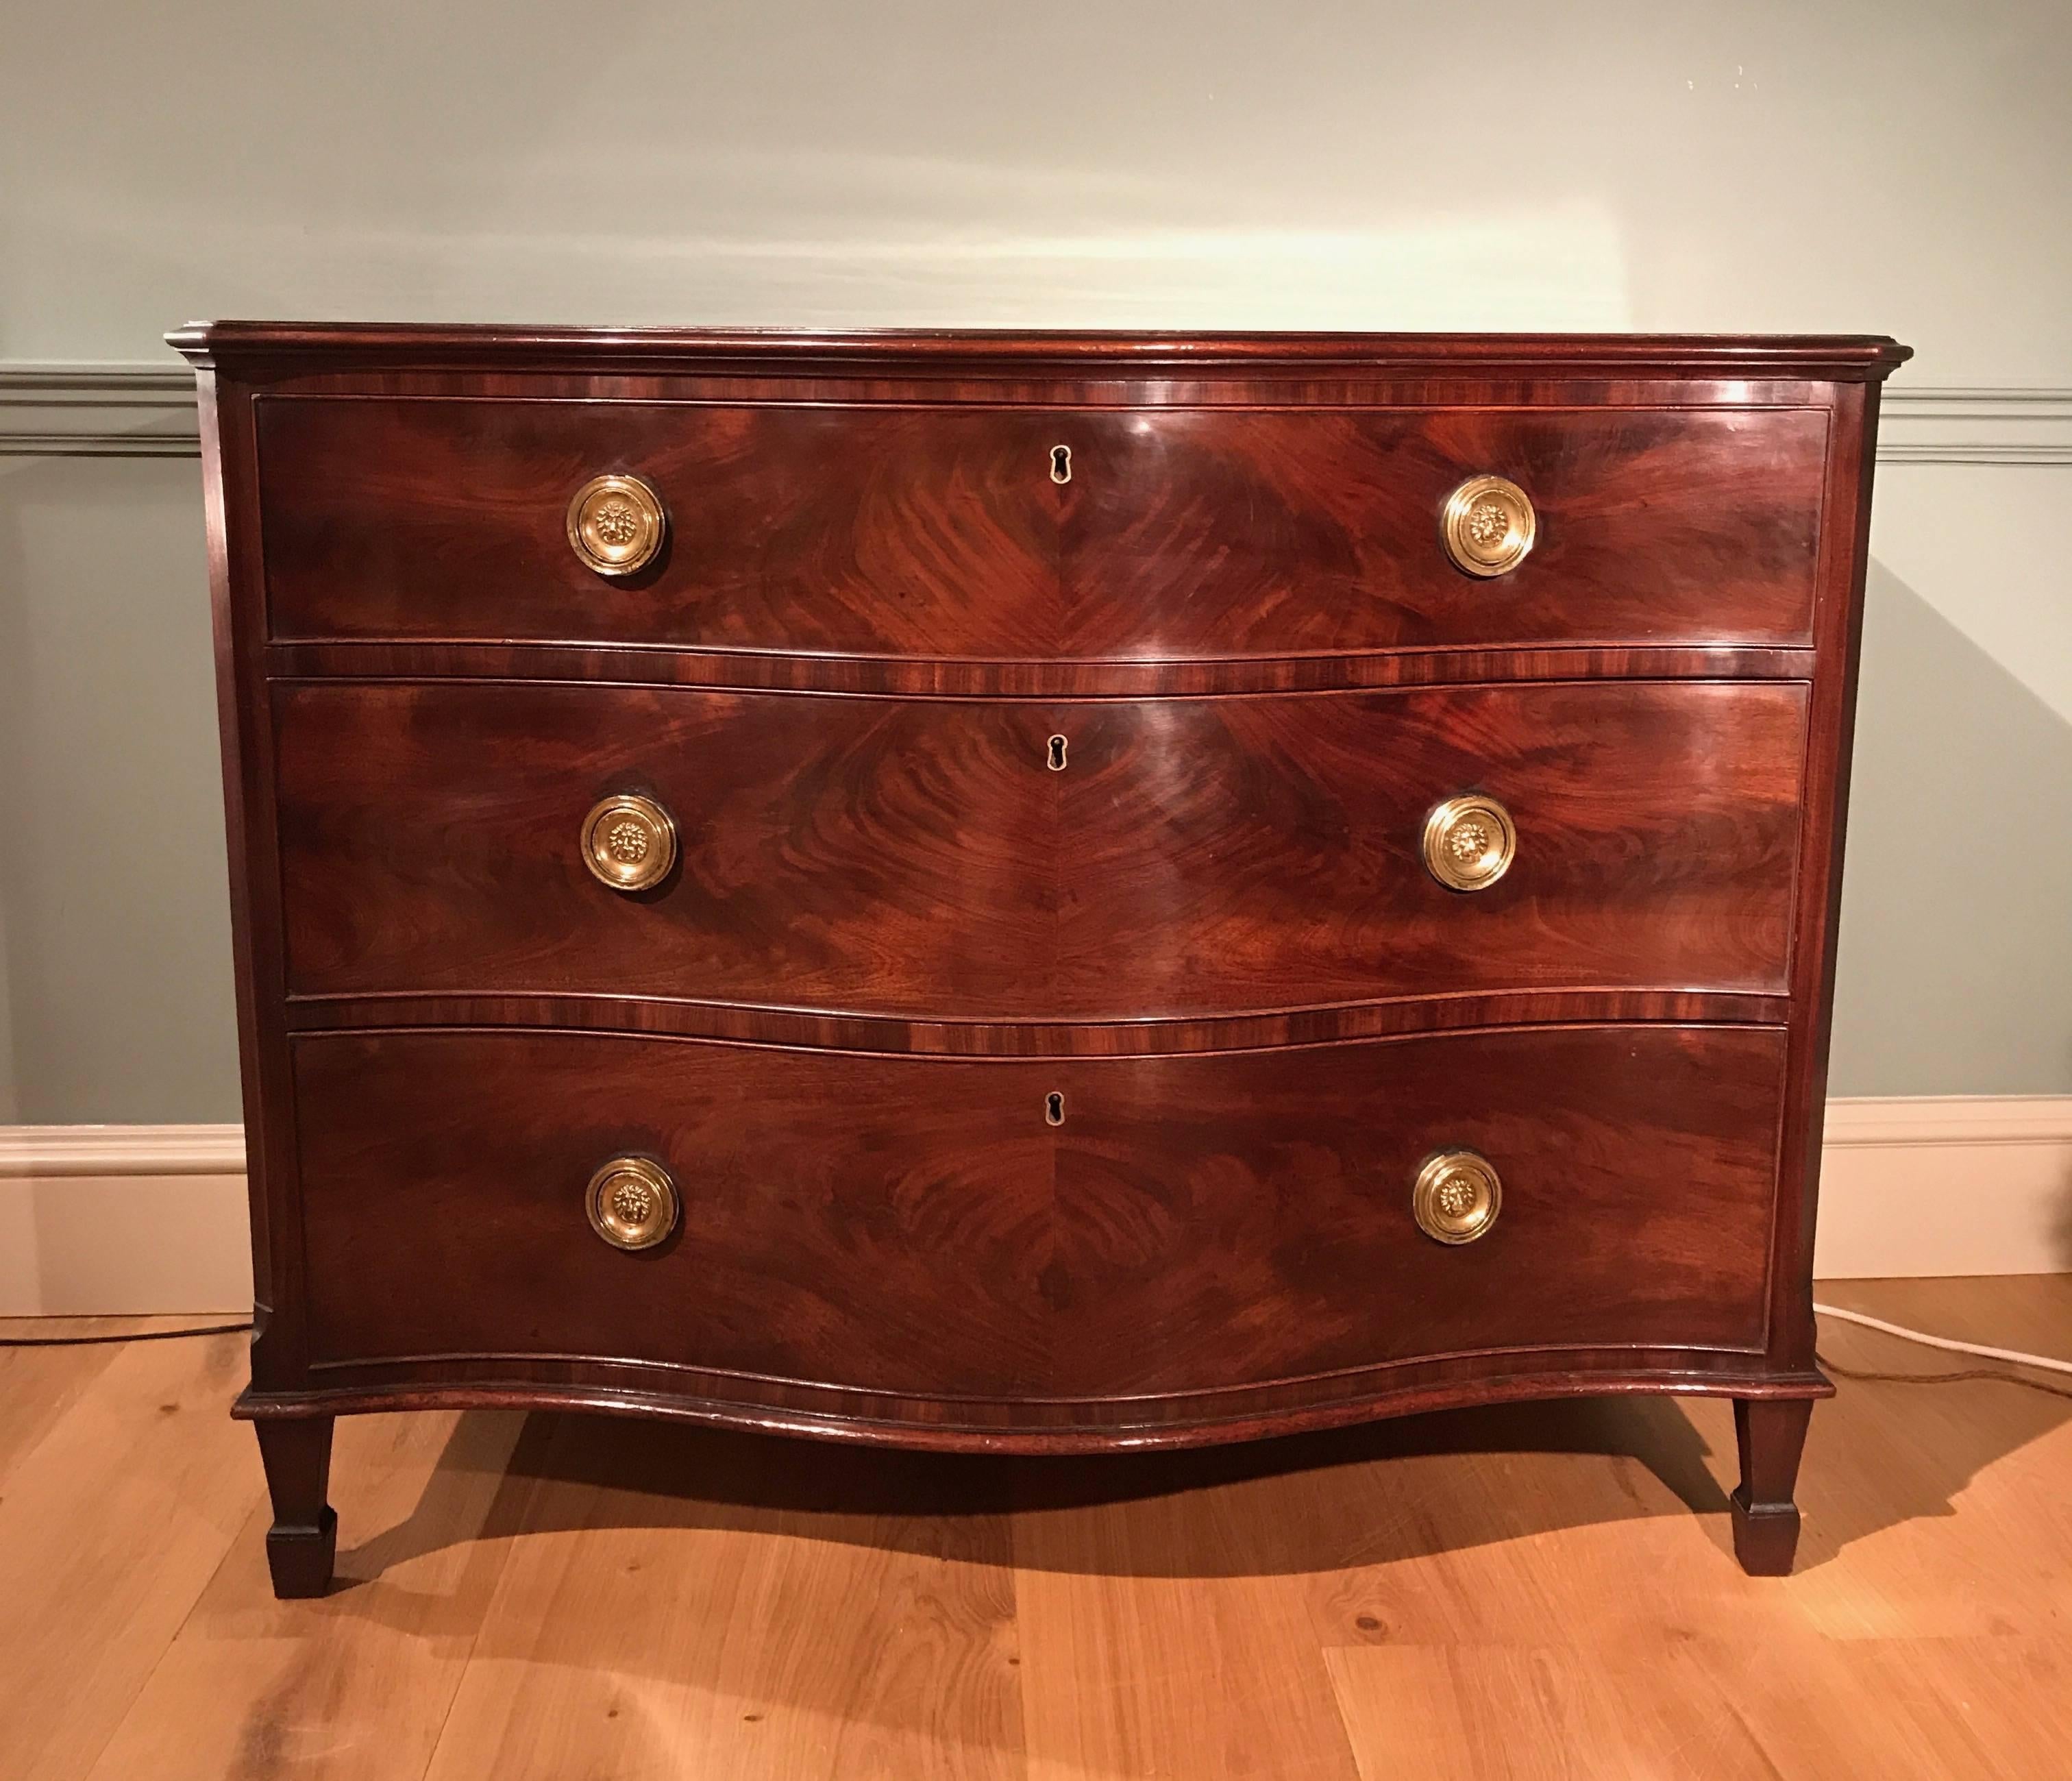 A fine George III serpentine mahogany commode of excellent colour and patination, having three drawers with lion mask handles standing on toupe spade feet. English, circa 1790.